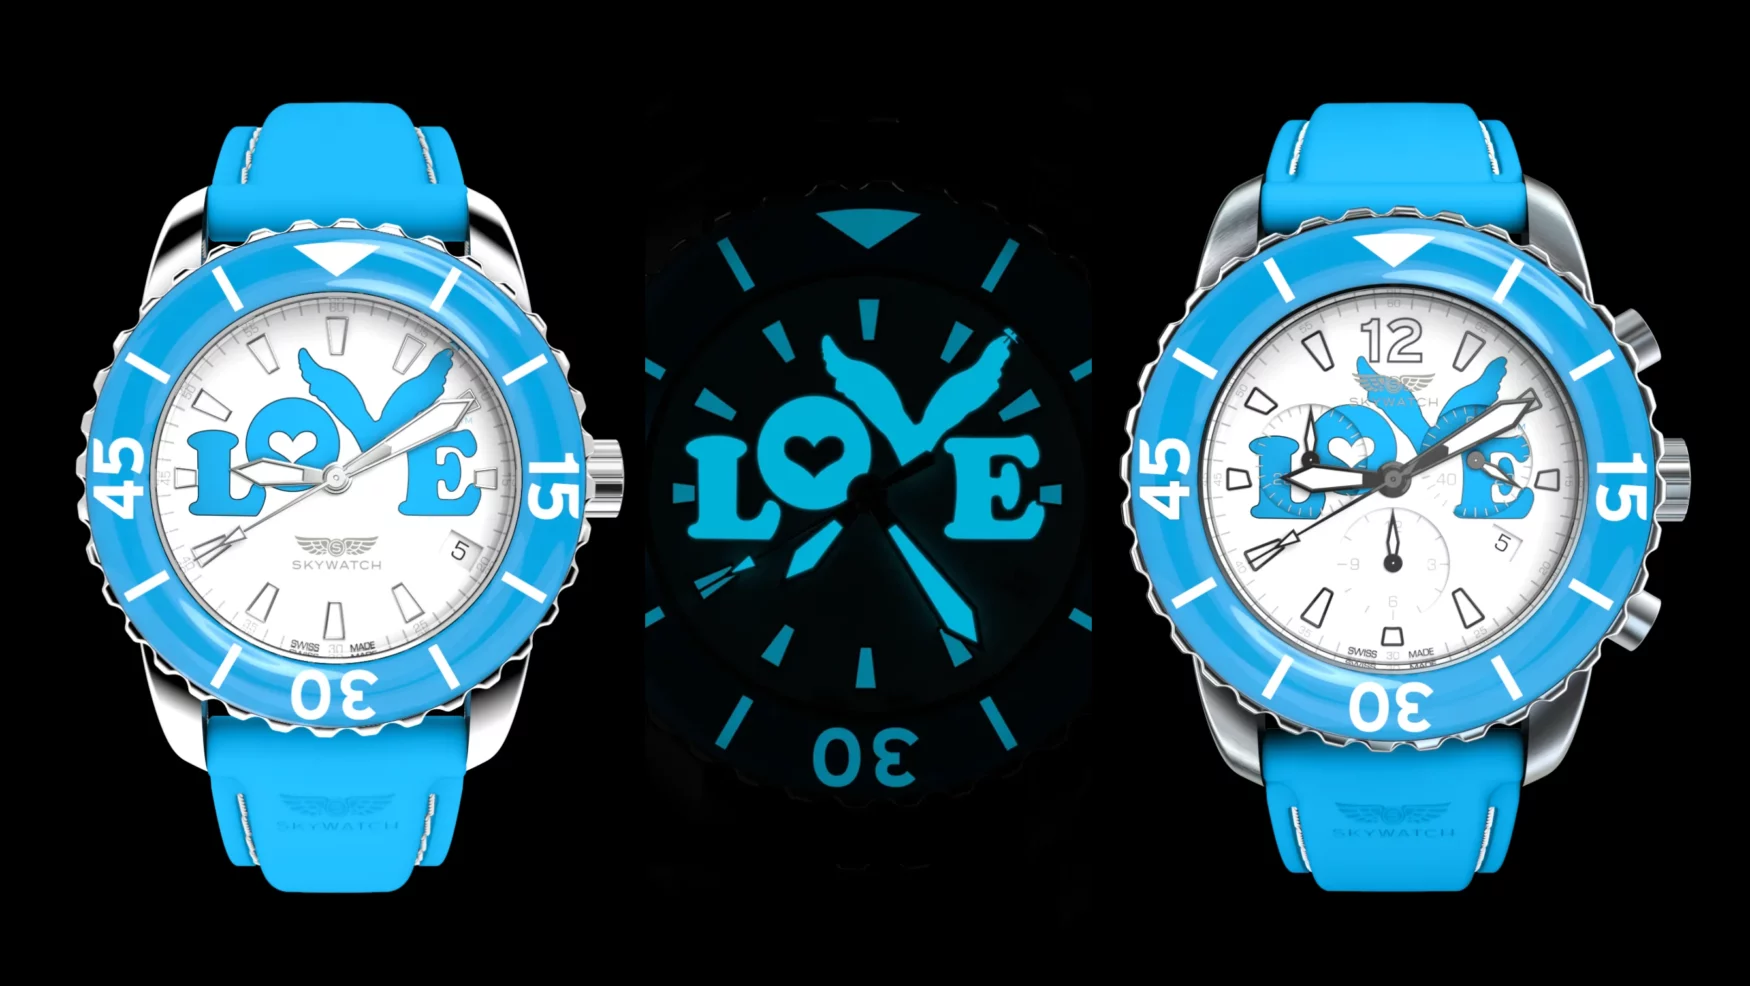 Did you know Coldplay’s Chris Martin co-designed a dive watch collab?